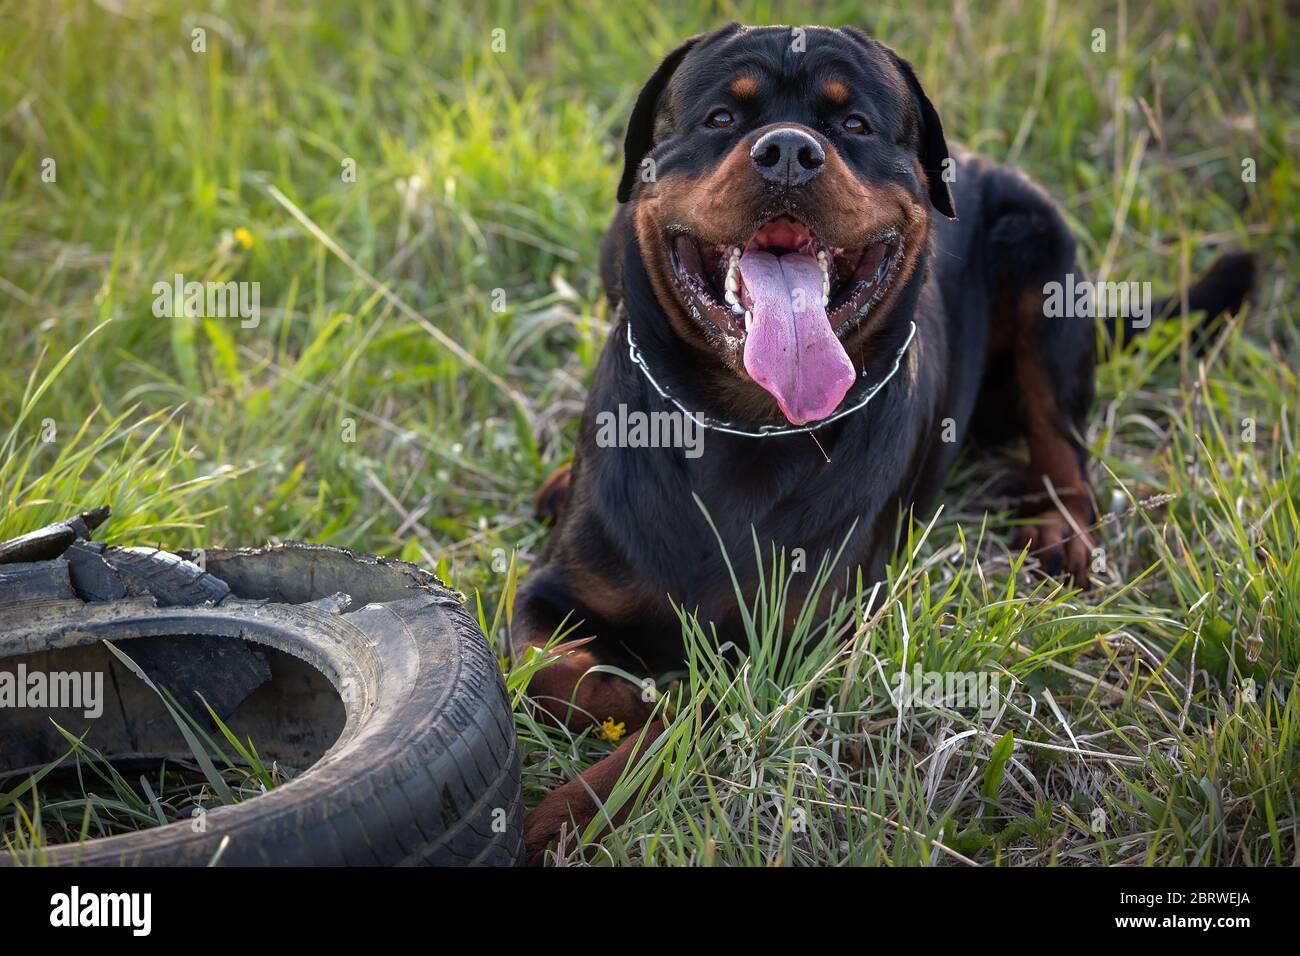 Young rottweiler dog looking at the camera Stock Photo